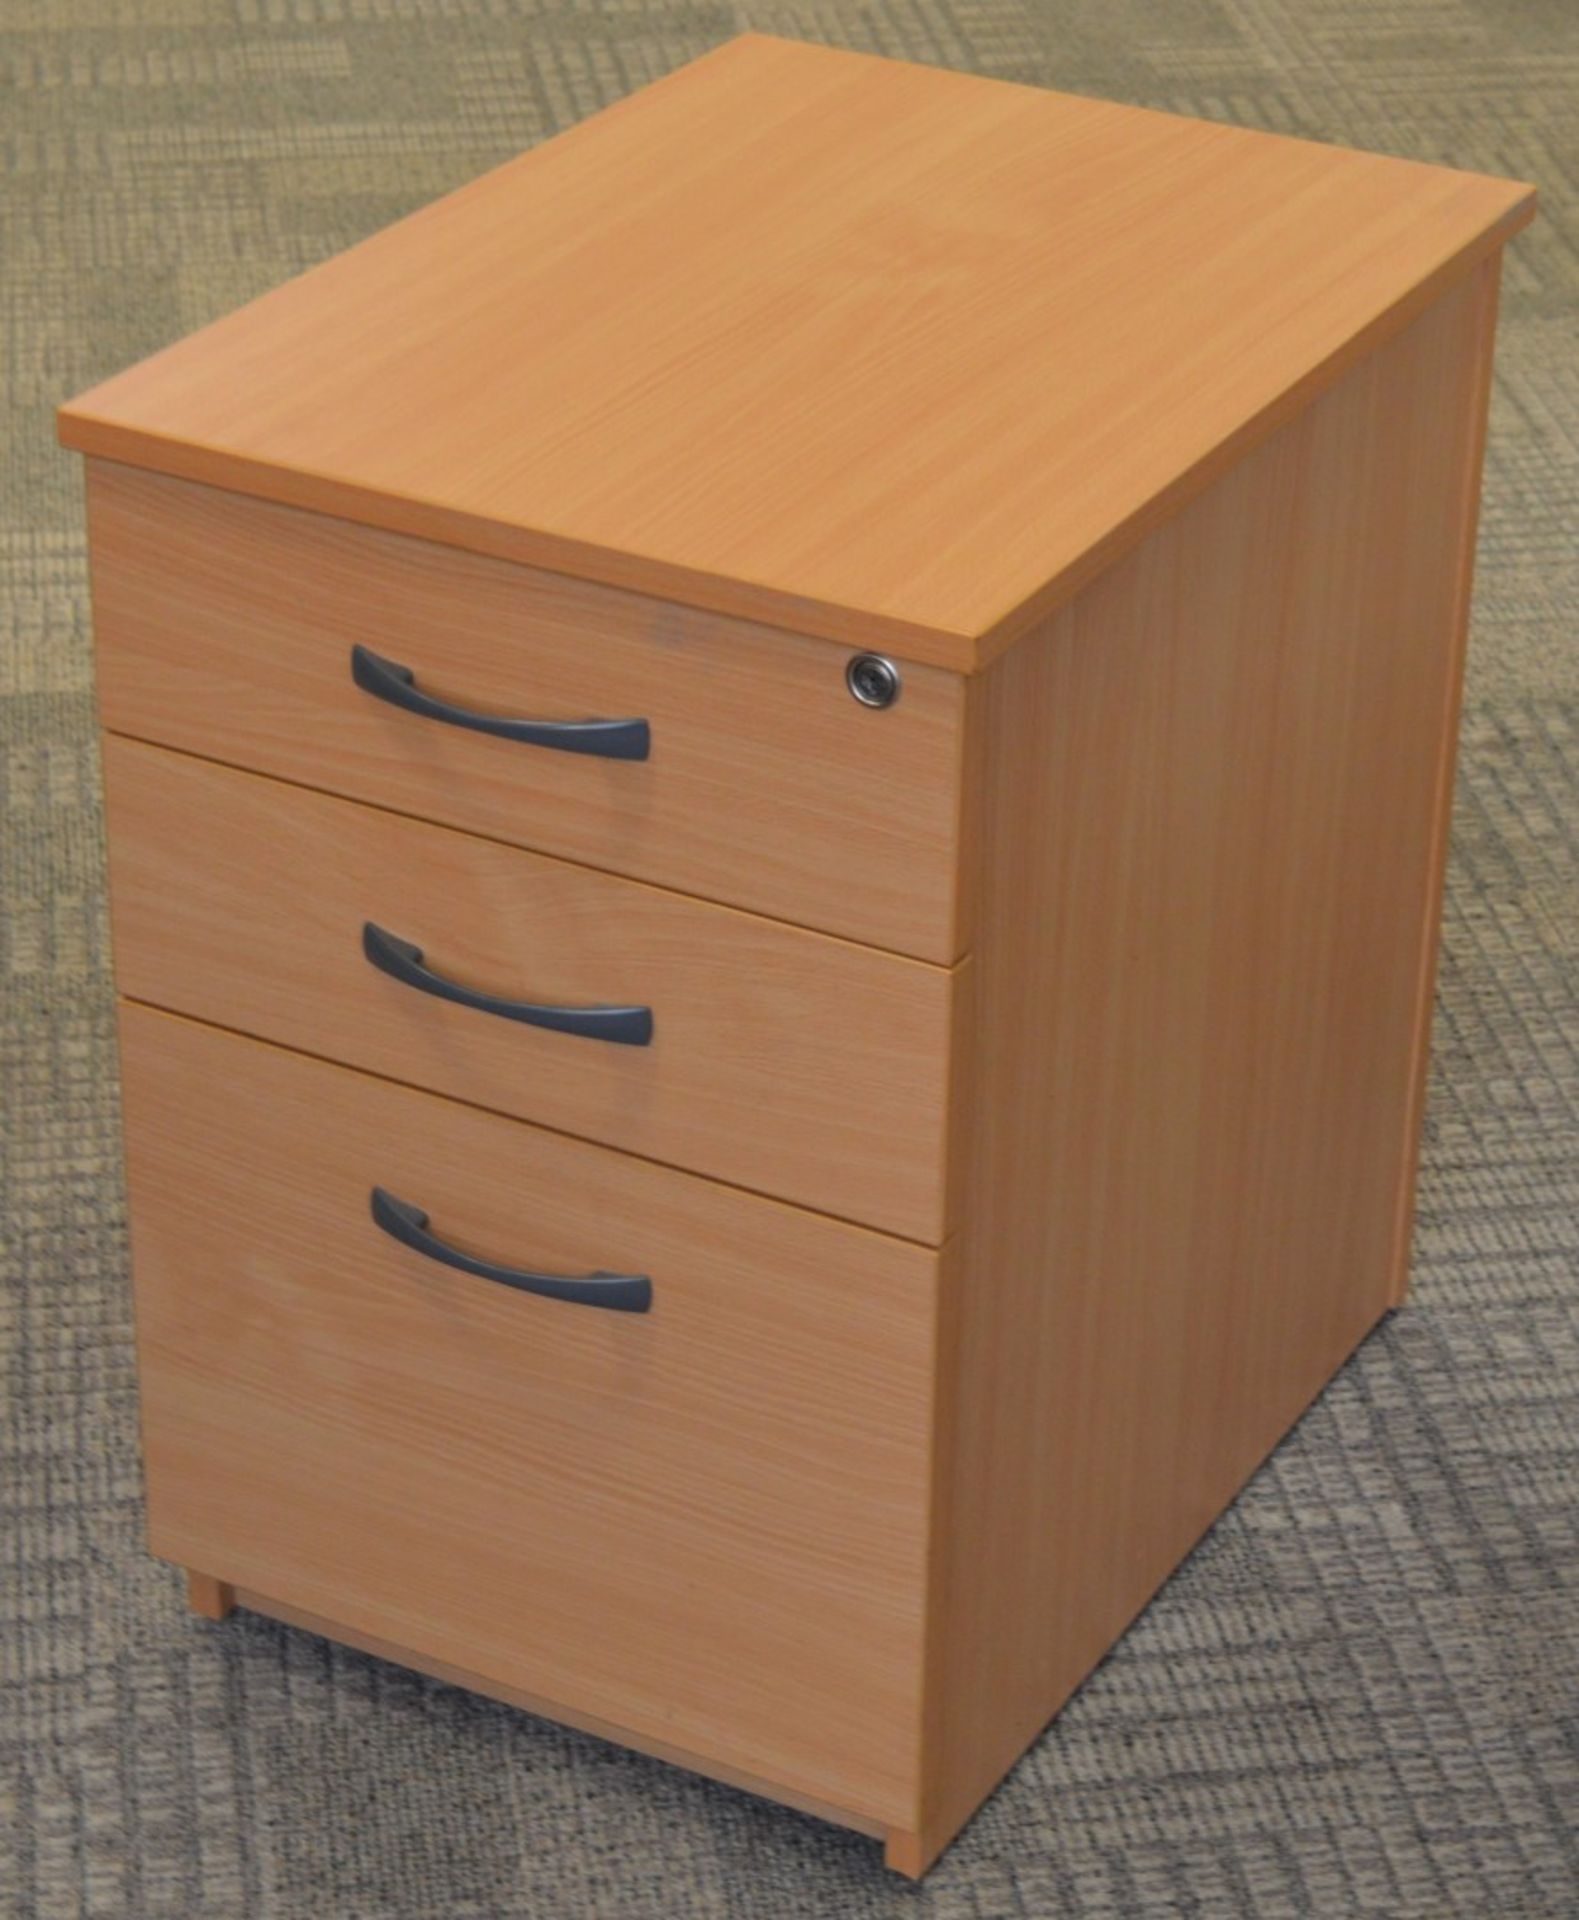 1 x Three Drawer Mobile Pedestal Drawers - With Key - Modern Beech Finish - Two Storage Drawers - Image 2 of 6